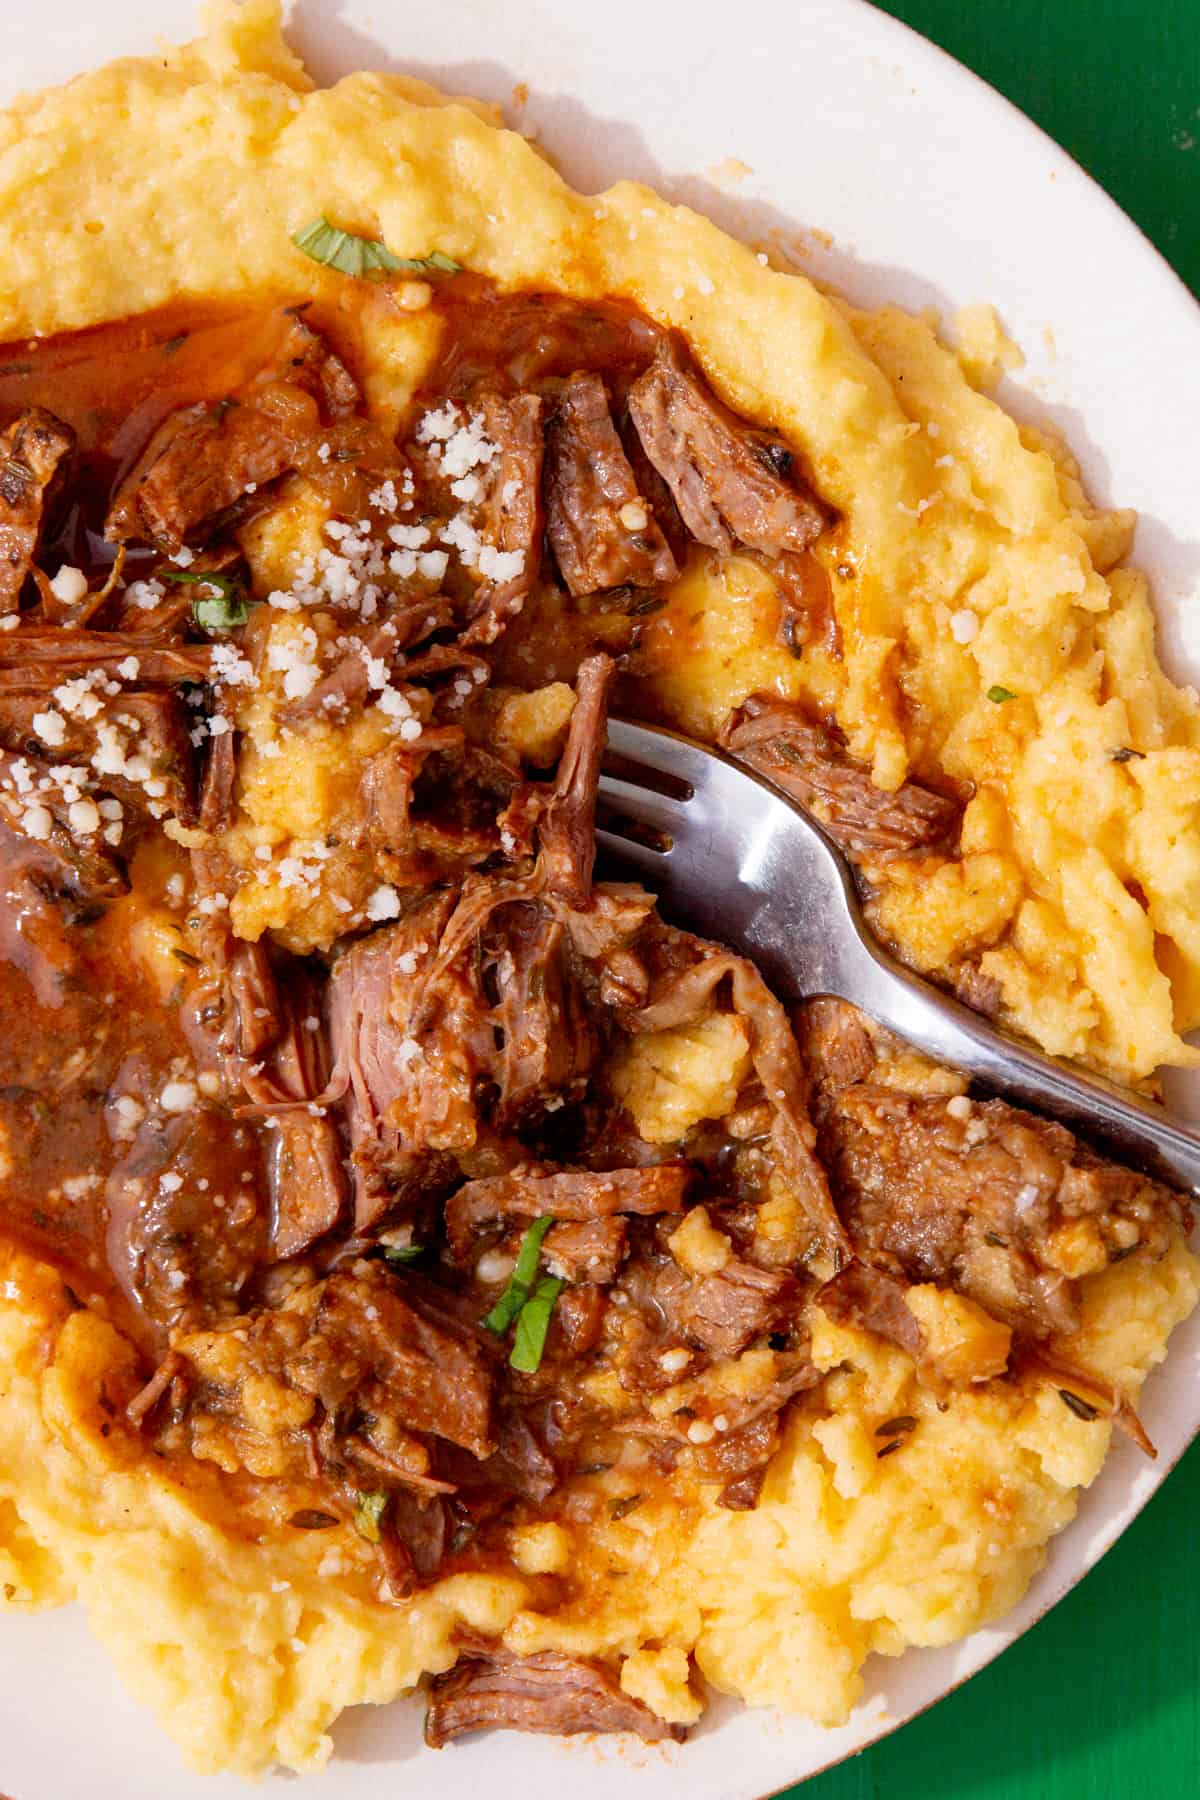 A close up of shredded steak with gravy served over a bed of polenta with a fork on the plate.